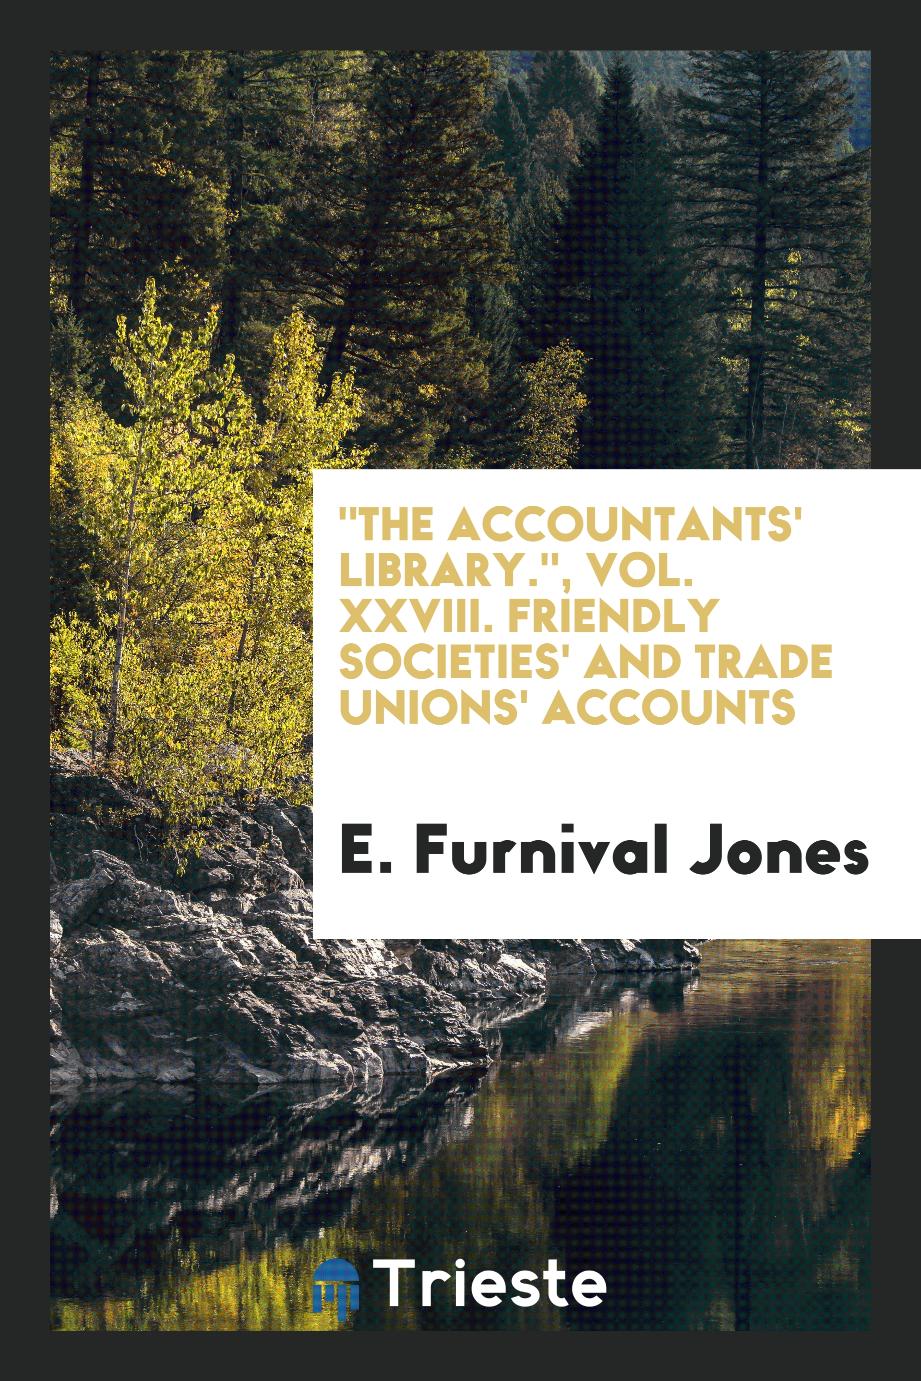 "The Accountants' Library.", Vol. XXVIII. Friendly Societies' and Trade Unions' Accounts